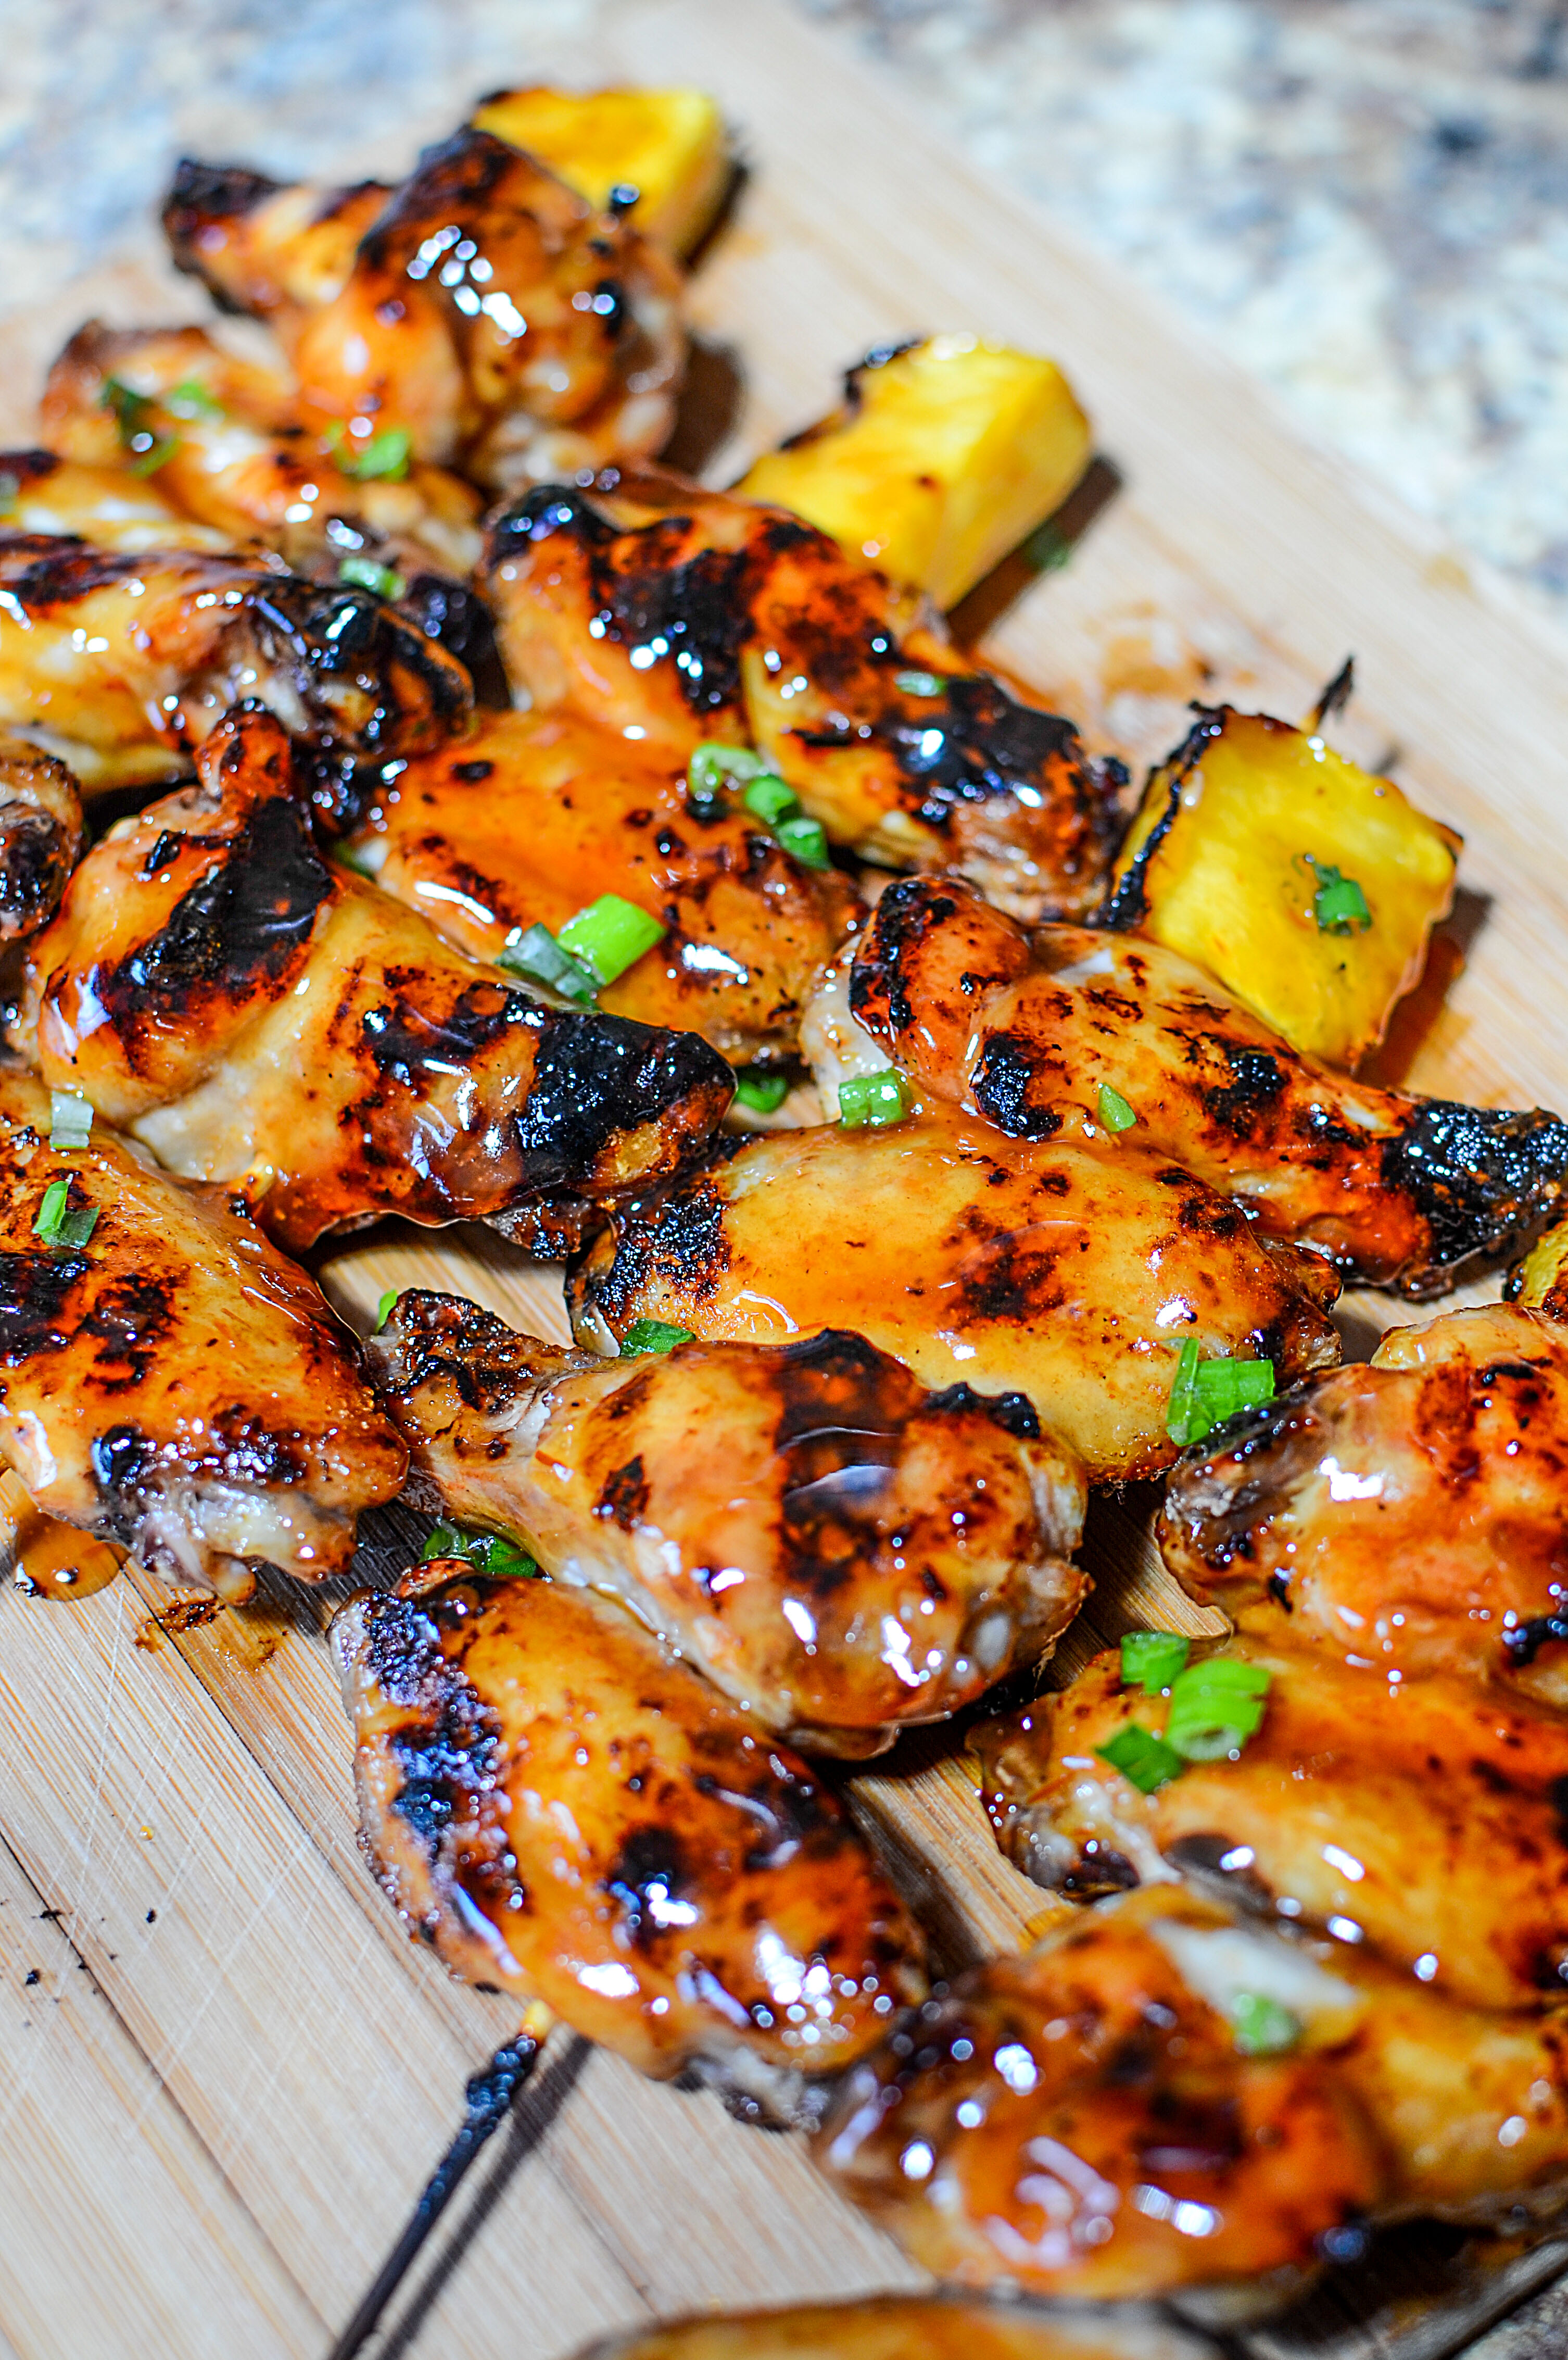 Here's a different take on traditional kabobs. Fabulous recipes for Sweet and Spicy Grilled Wings on Skewers. They'll have be the talk of any BBQ.